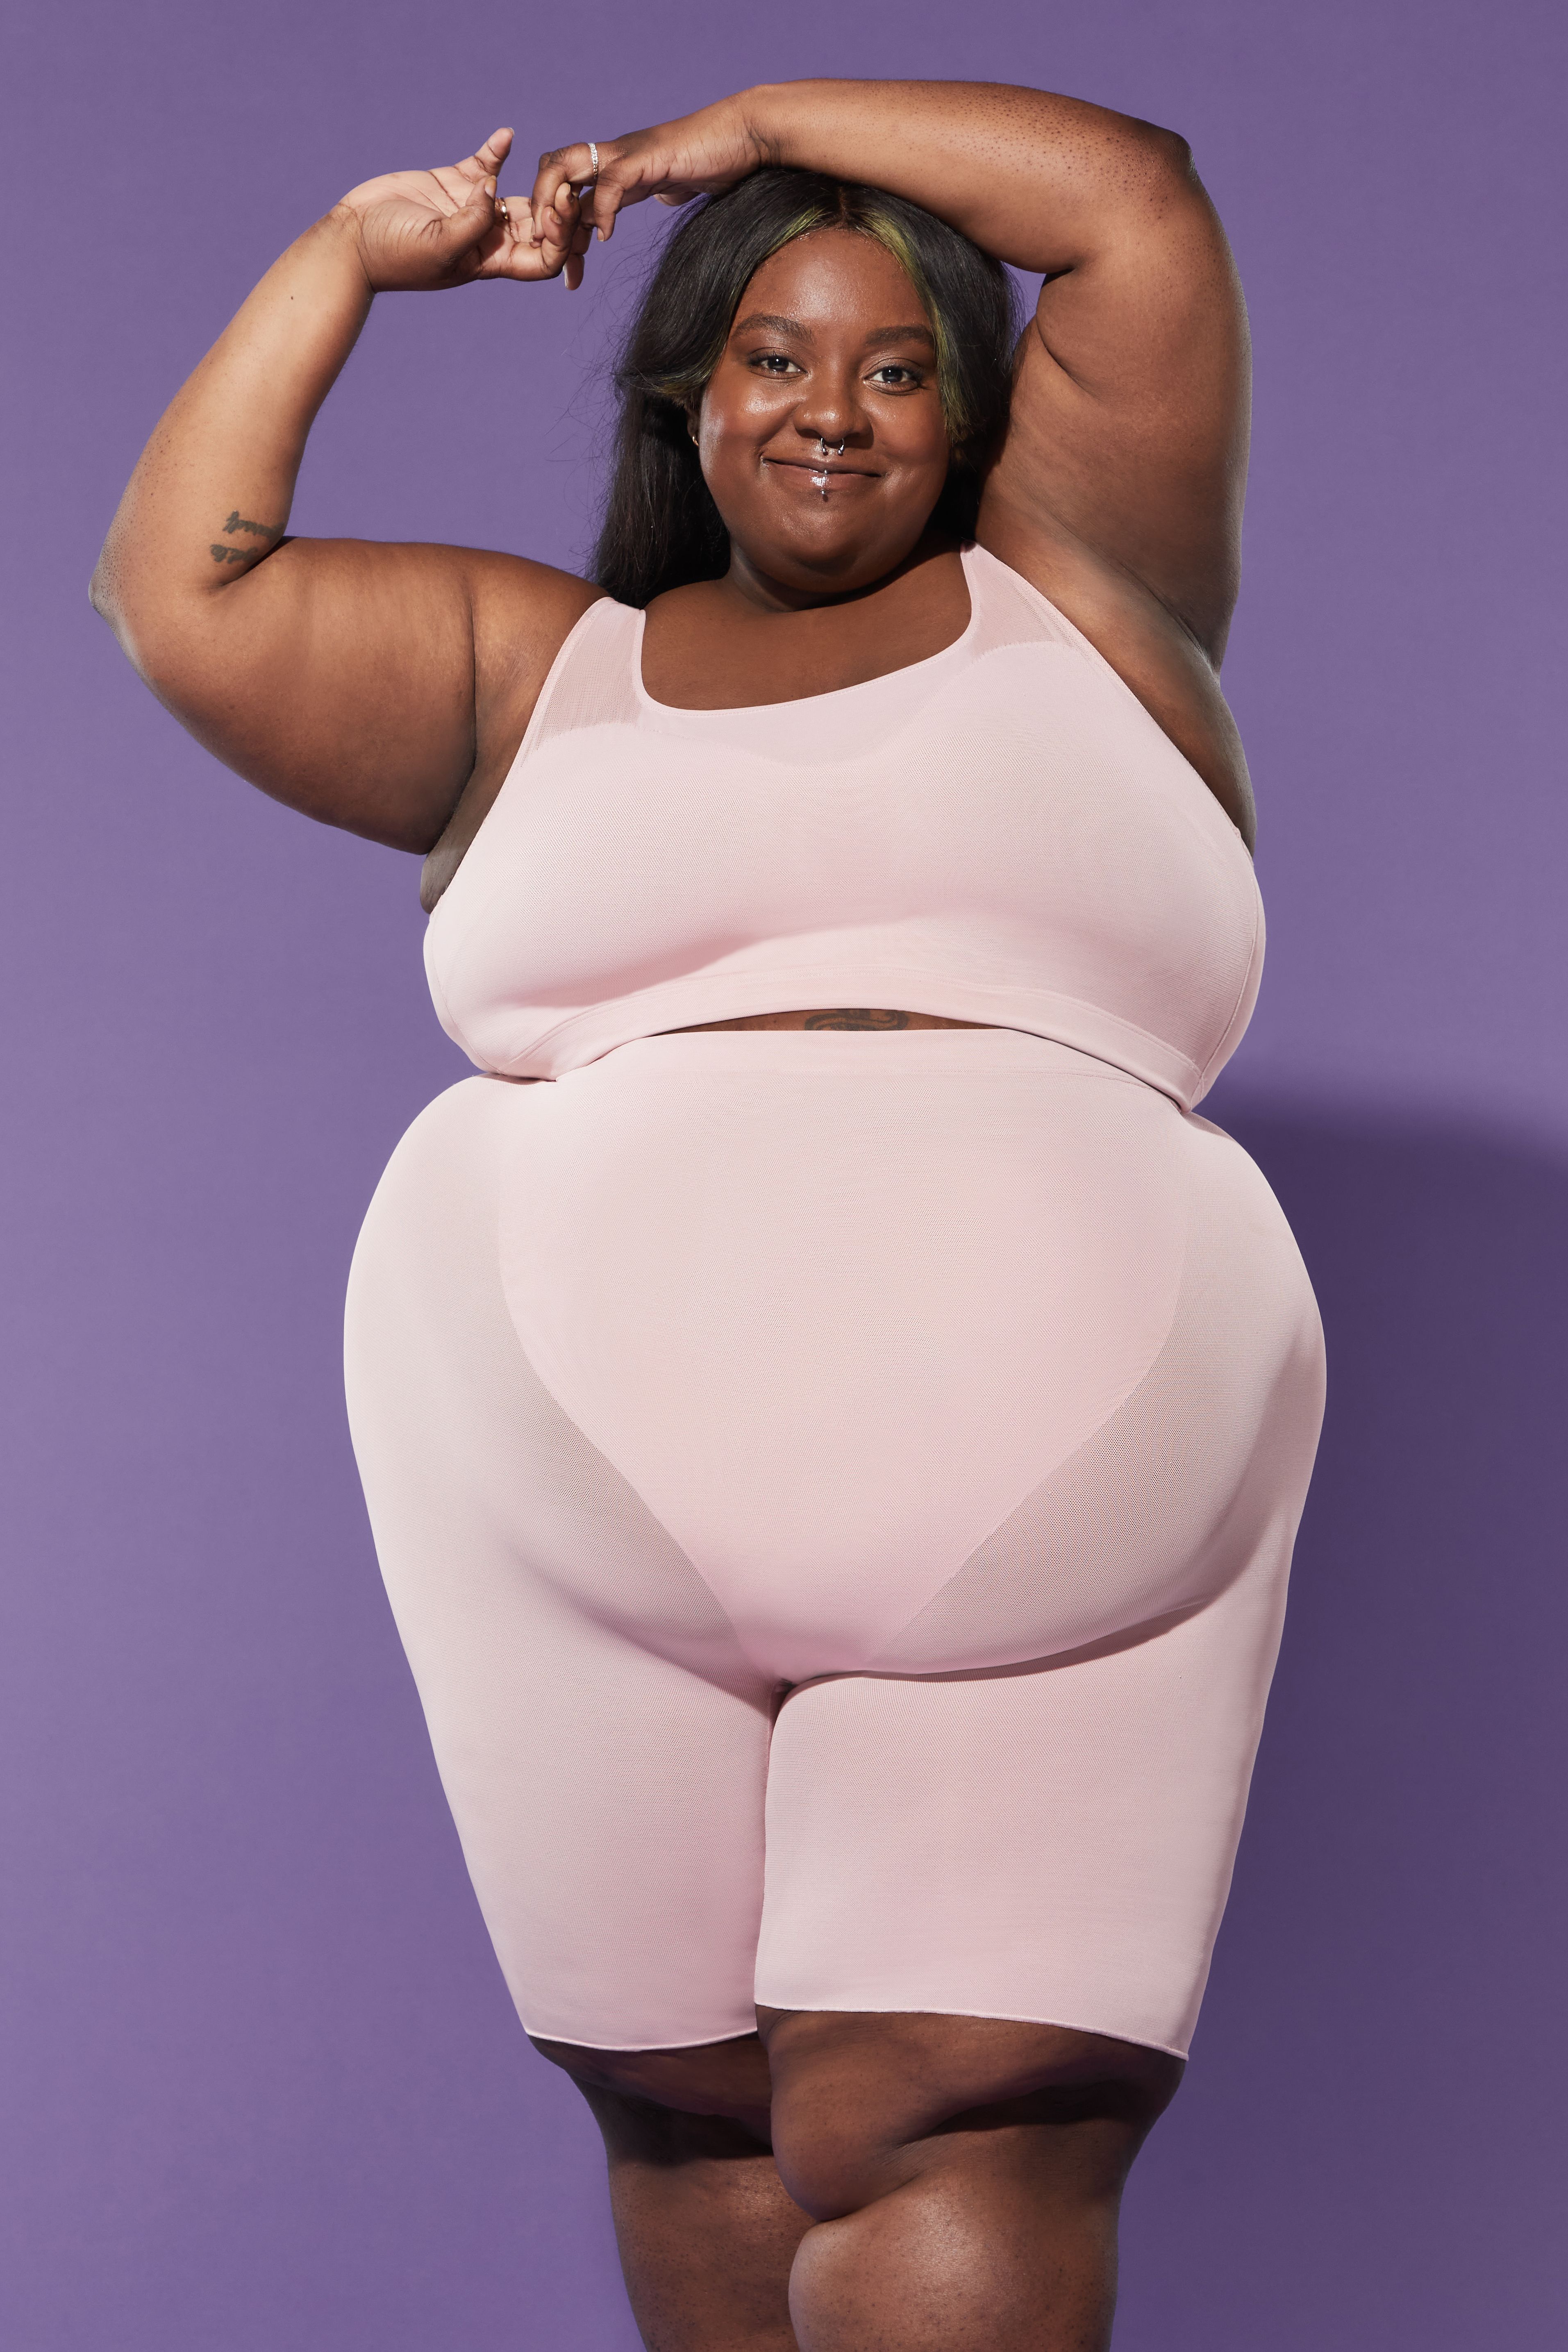 How to Buy Lizzo's Yitty Shapewear Online